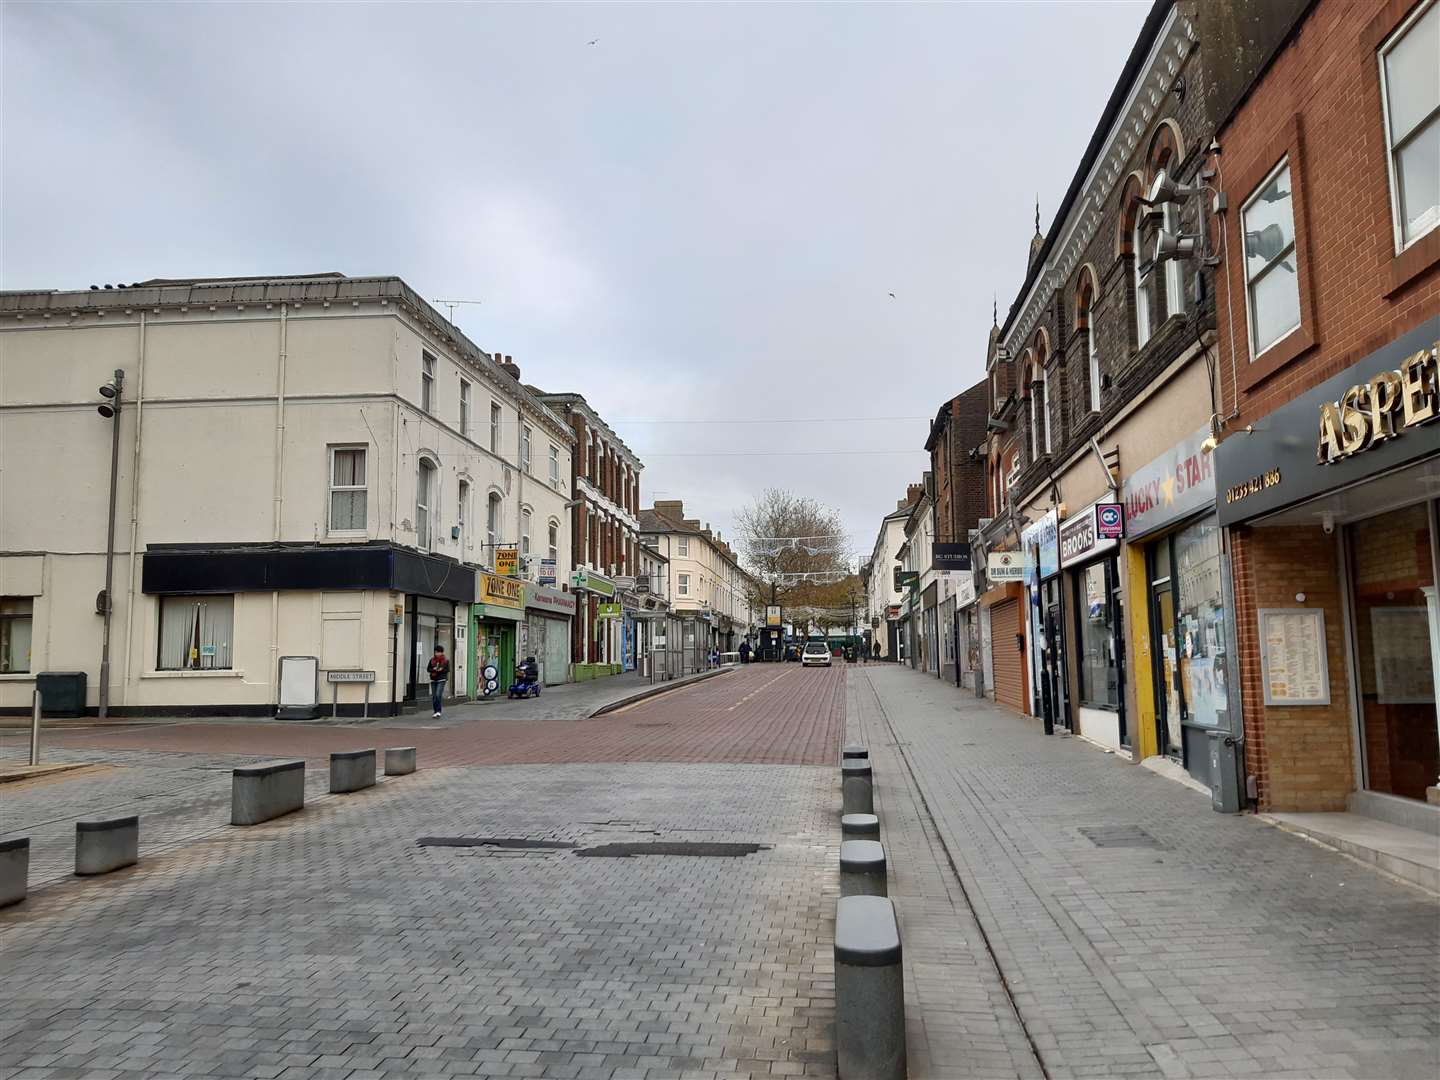 Bank Street is a key part of the 'reset' plans